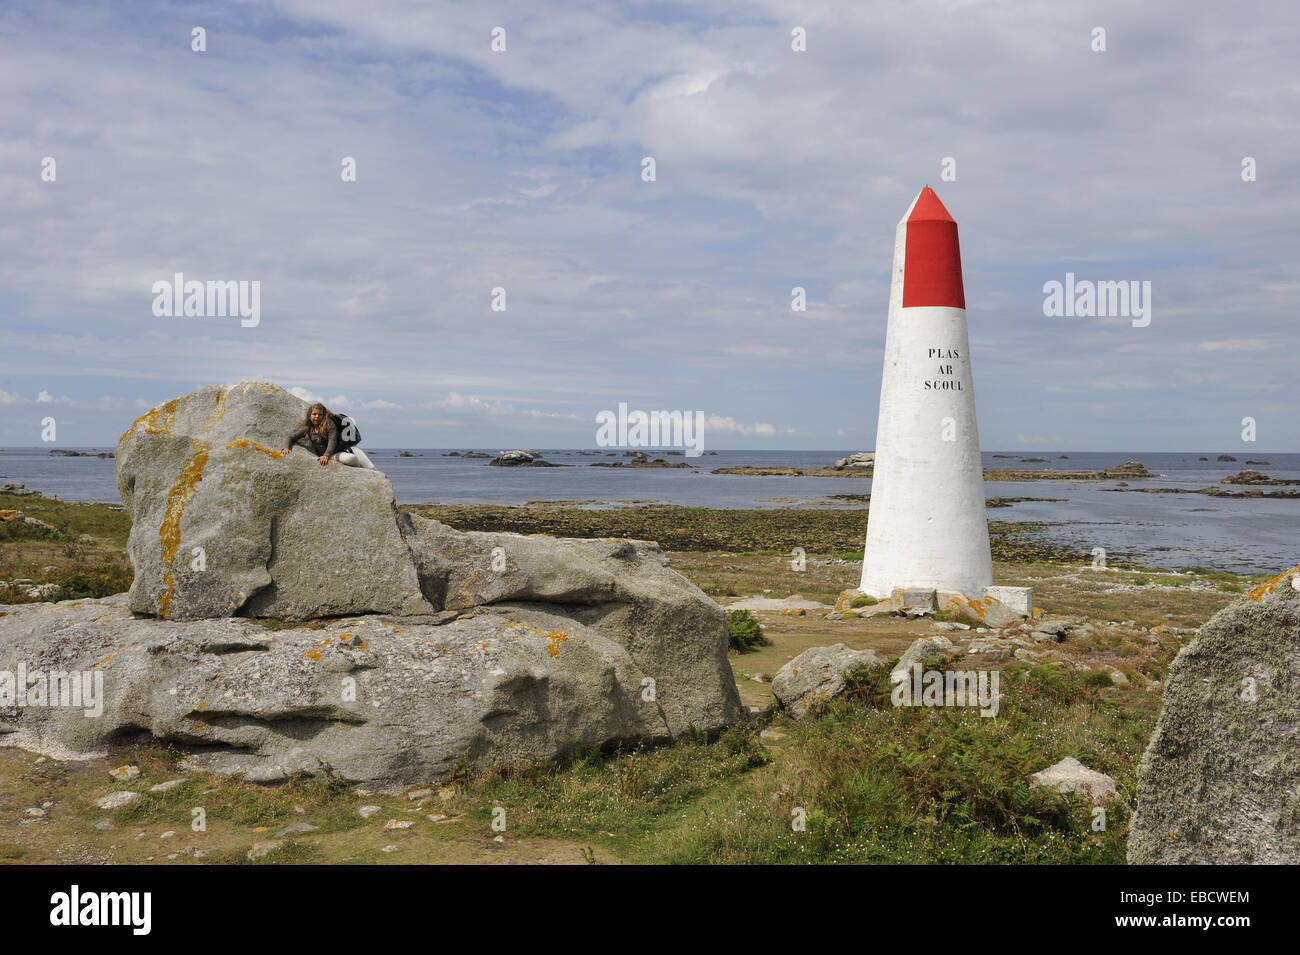 seamark on Ile de Sein, off the coast of Pointe du Raz, Finistere department, Brittany region, west of France, western Europe. Stock Photo